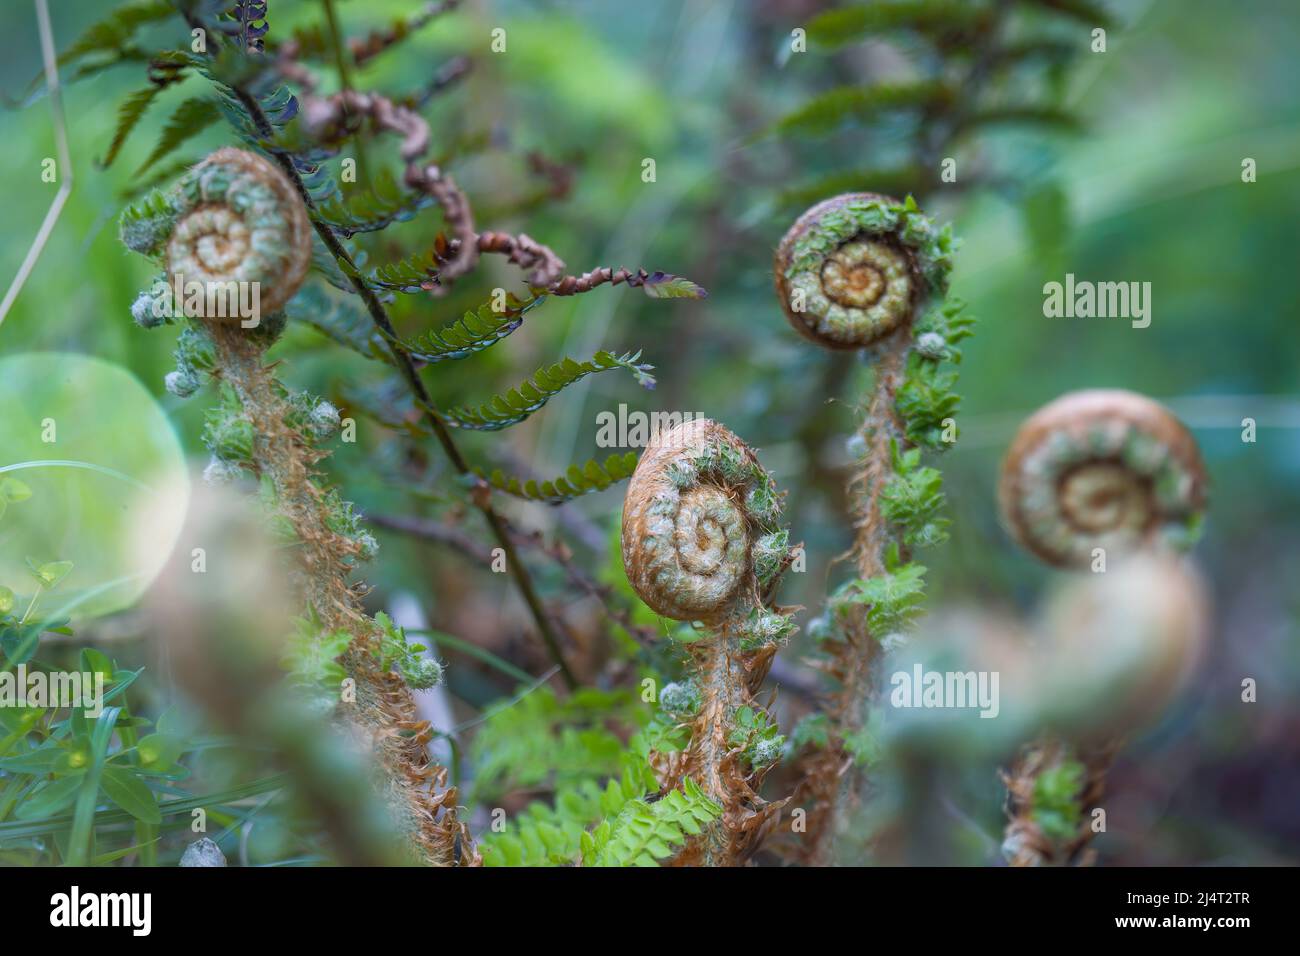 young fern plant, leafy, with its leaves still in spiral. photo with detail. macro photography. nature. close up Stock Photo